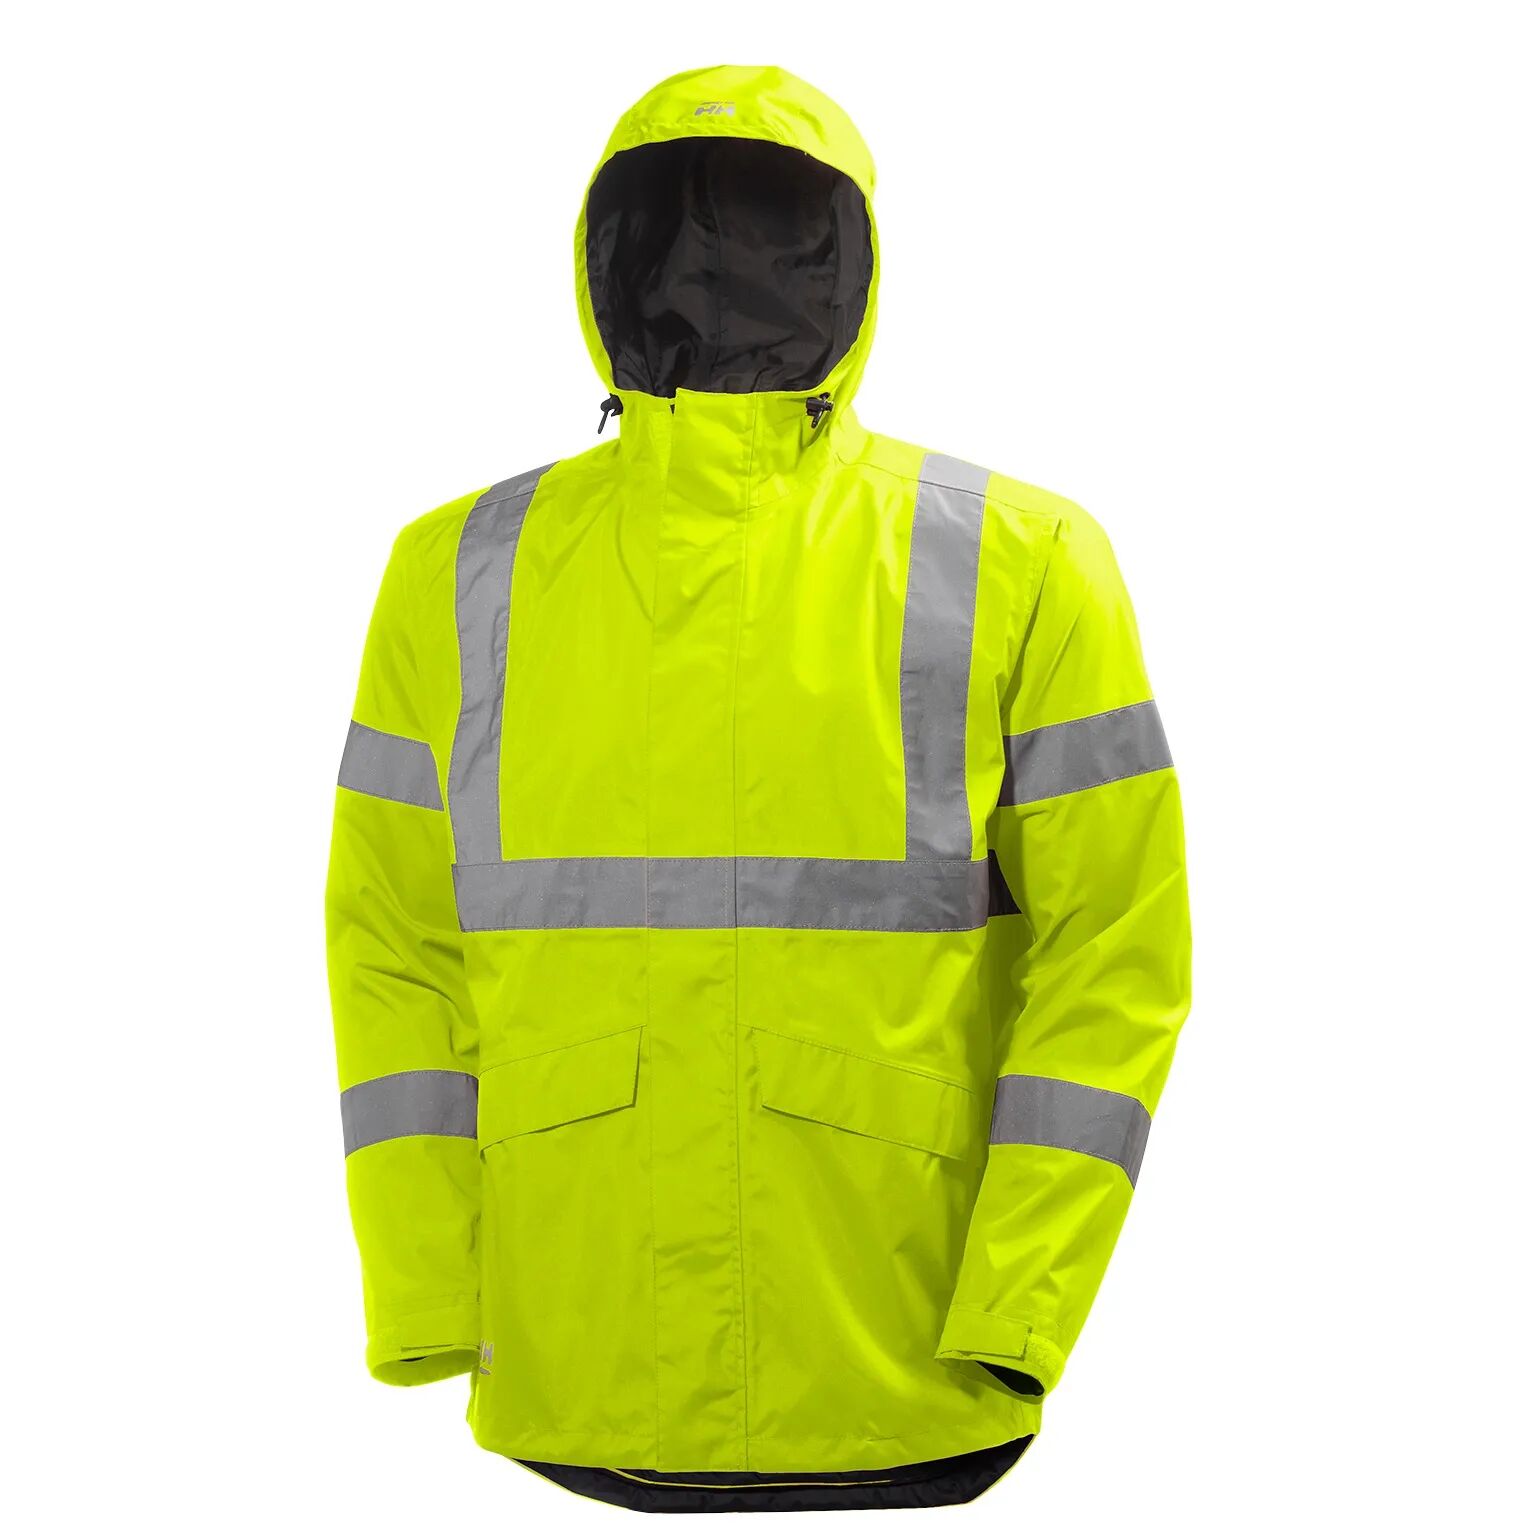 HH Workwear Helly Hansen WorkwearAlta Breathable Protective Shelter Jacket Yellow L